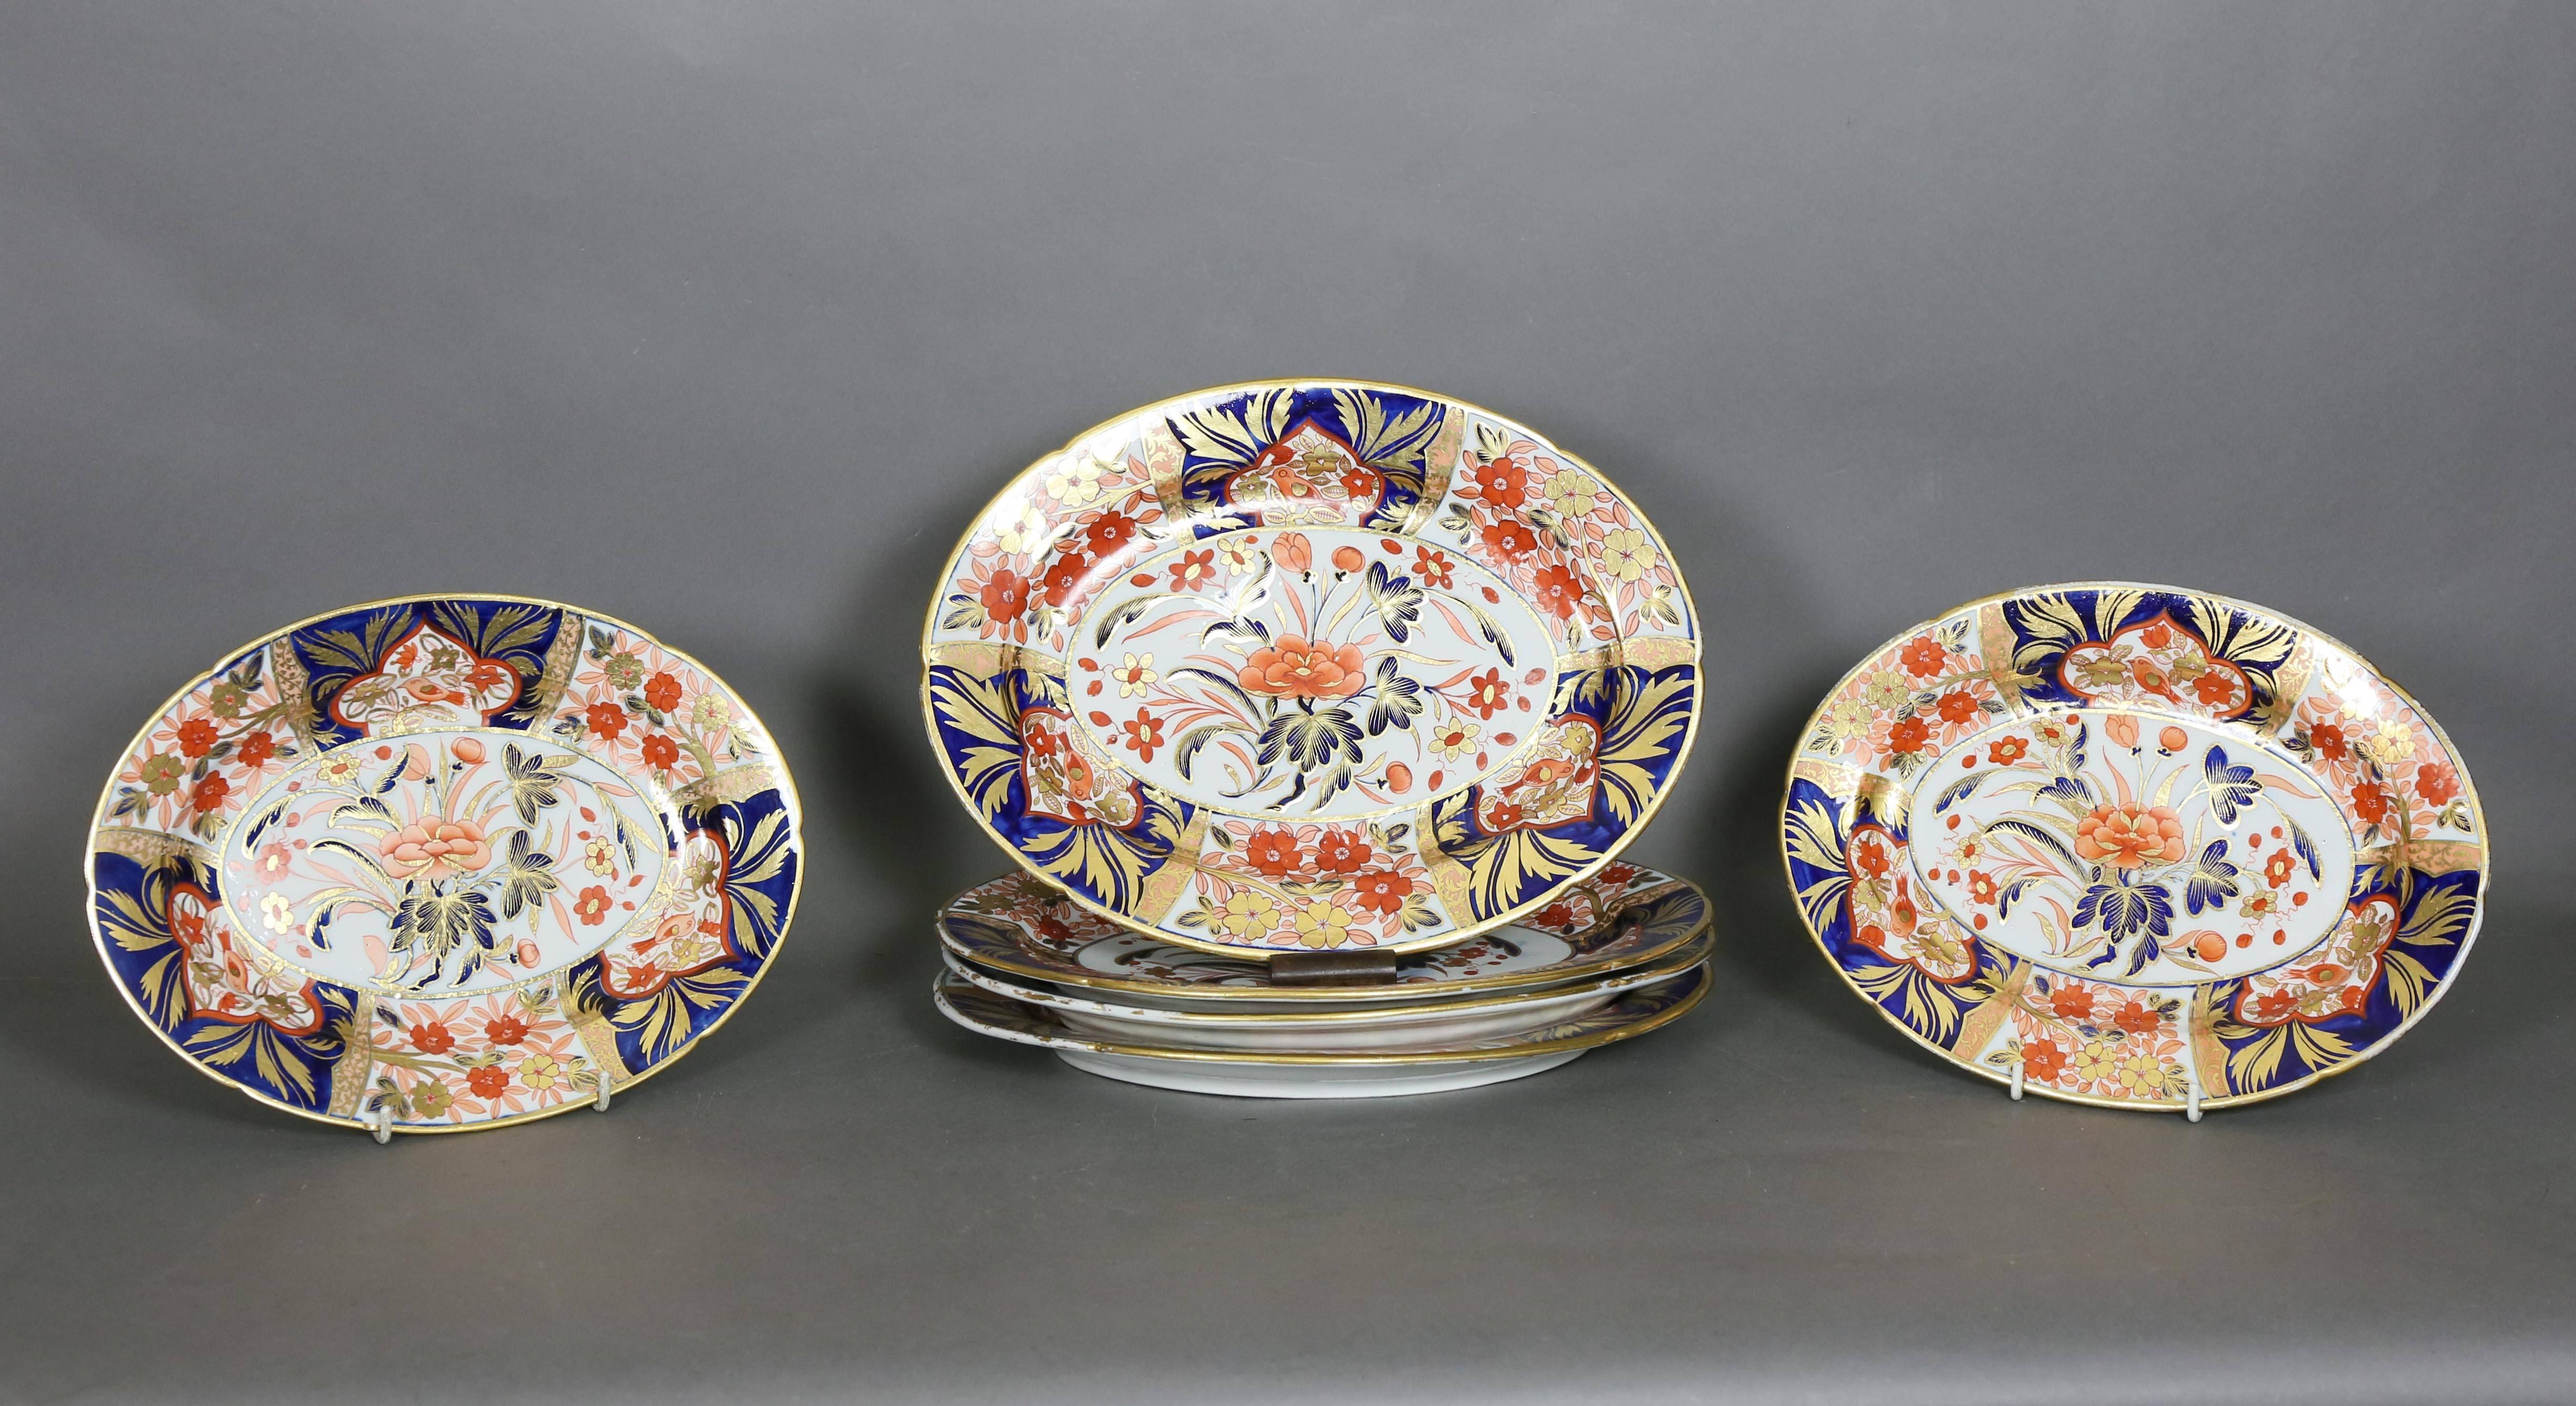 An intricate design of flowers and birds in red, blue, and gold on a white field. There are minor differences in the design on each piece.

Set includes:
Nine dinner plates/9.38" D
Three soup plates/9.75" D
One sauce tureen/7" W